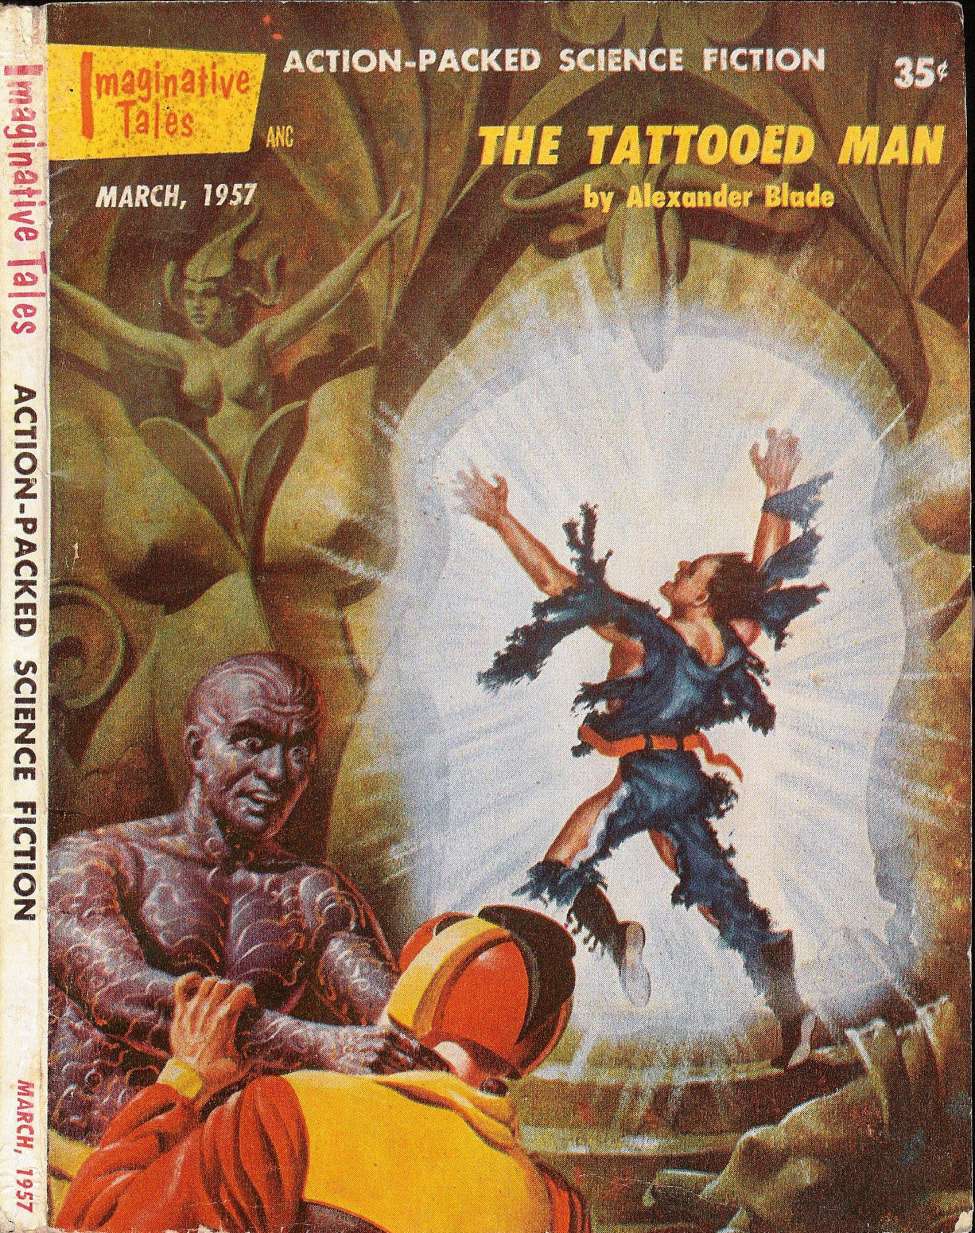 Book Cover For Imaginative Tales v4 2 - The Tattooed Man - Alexander Blade